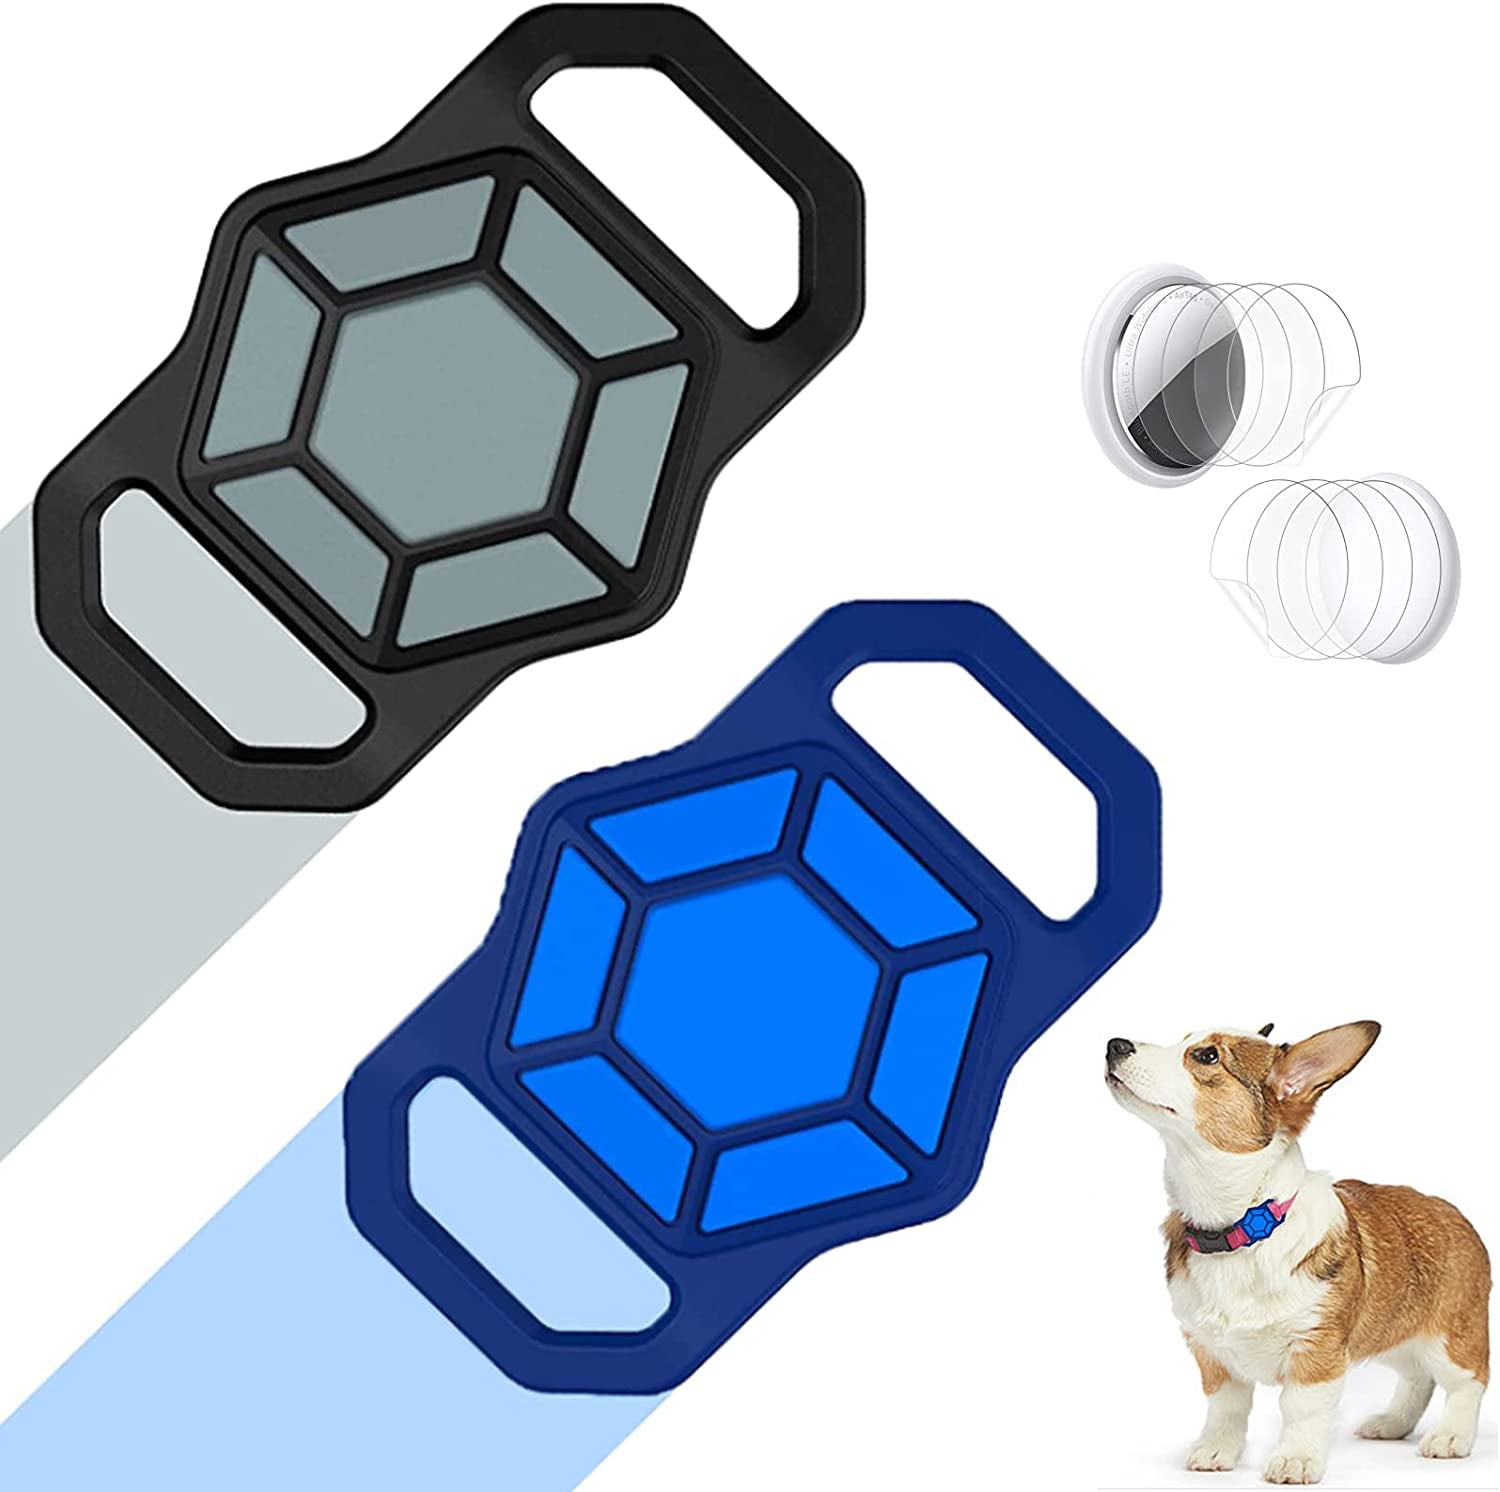 Neotrixqi Airtag Dog Collar Holder, Airtag Holder Accessories for Apple Airtags Tracker with 4 Pack HD Protective Film, Silicone Air Tag Case for Air Tags Pet Collar Loop Necklace Backpack Bag Electronics > GPS Accessories > GPS Cases NeotrixQI Black Blue  